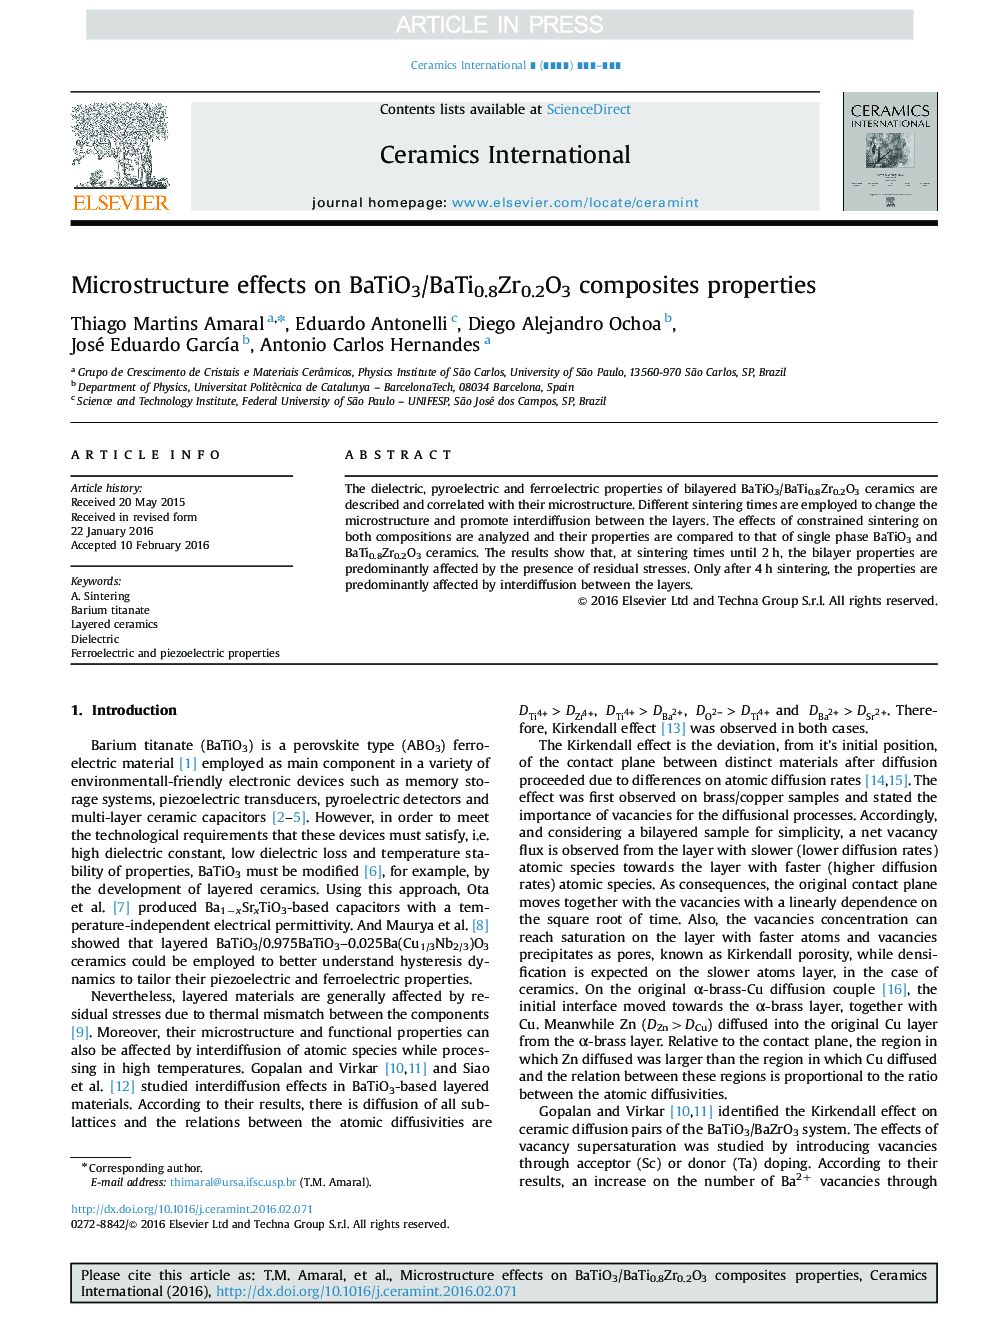 Microstructure effects on BaTiO3/BaTi0.8Zr0.2O3 composites properties